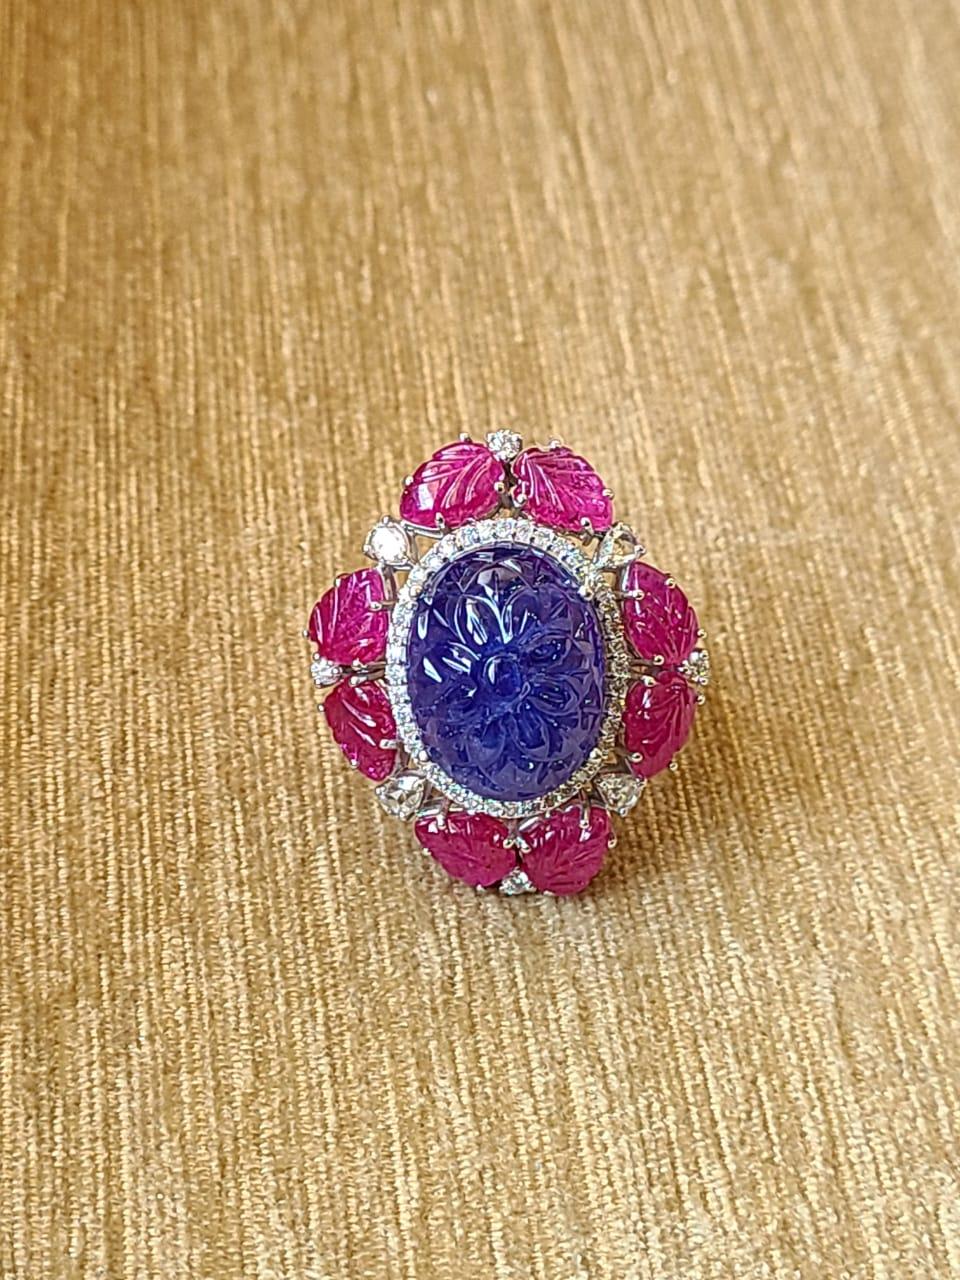 A one of a kind, Tanzanite & Ruby Cocktail/ Dome Ring set in 18K Gold & Diamonds. The weight of the carved Tanzanite is 28.17 carats. The Tanzanite is completely natural and hand-carved in our very own workshop. The Tanzanite is of Tanzania origin.